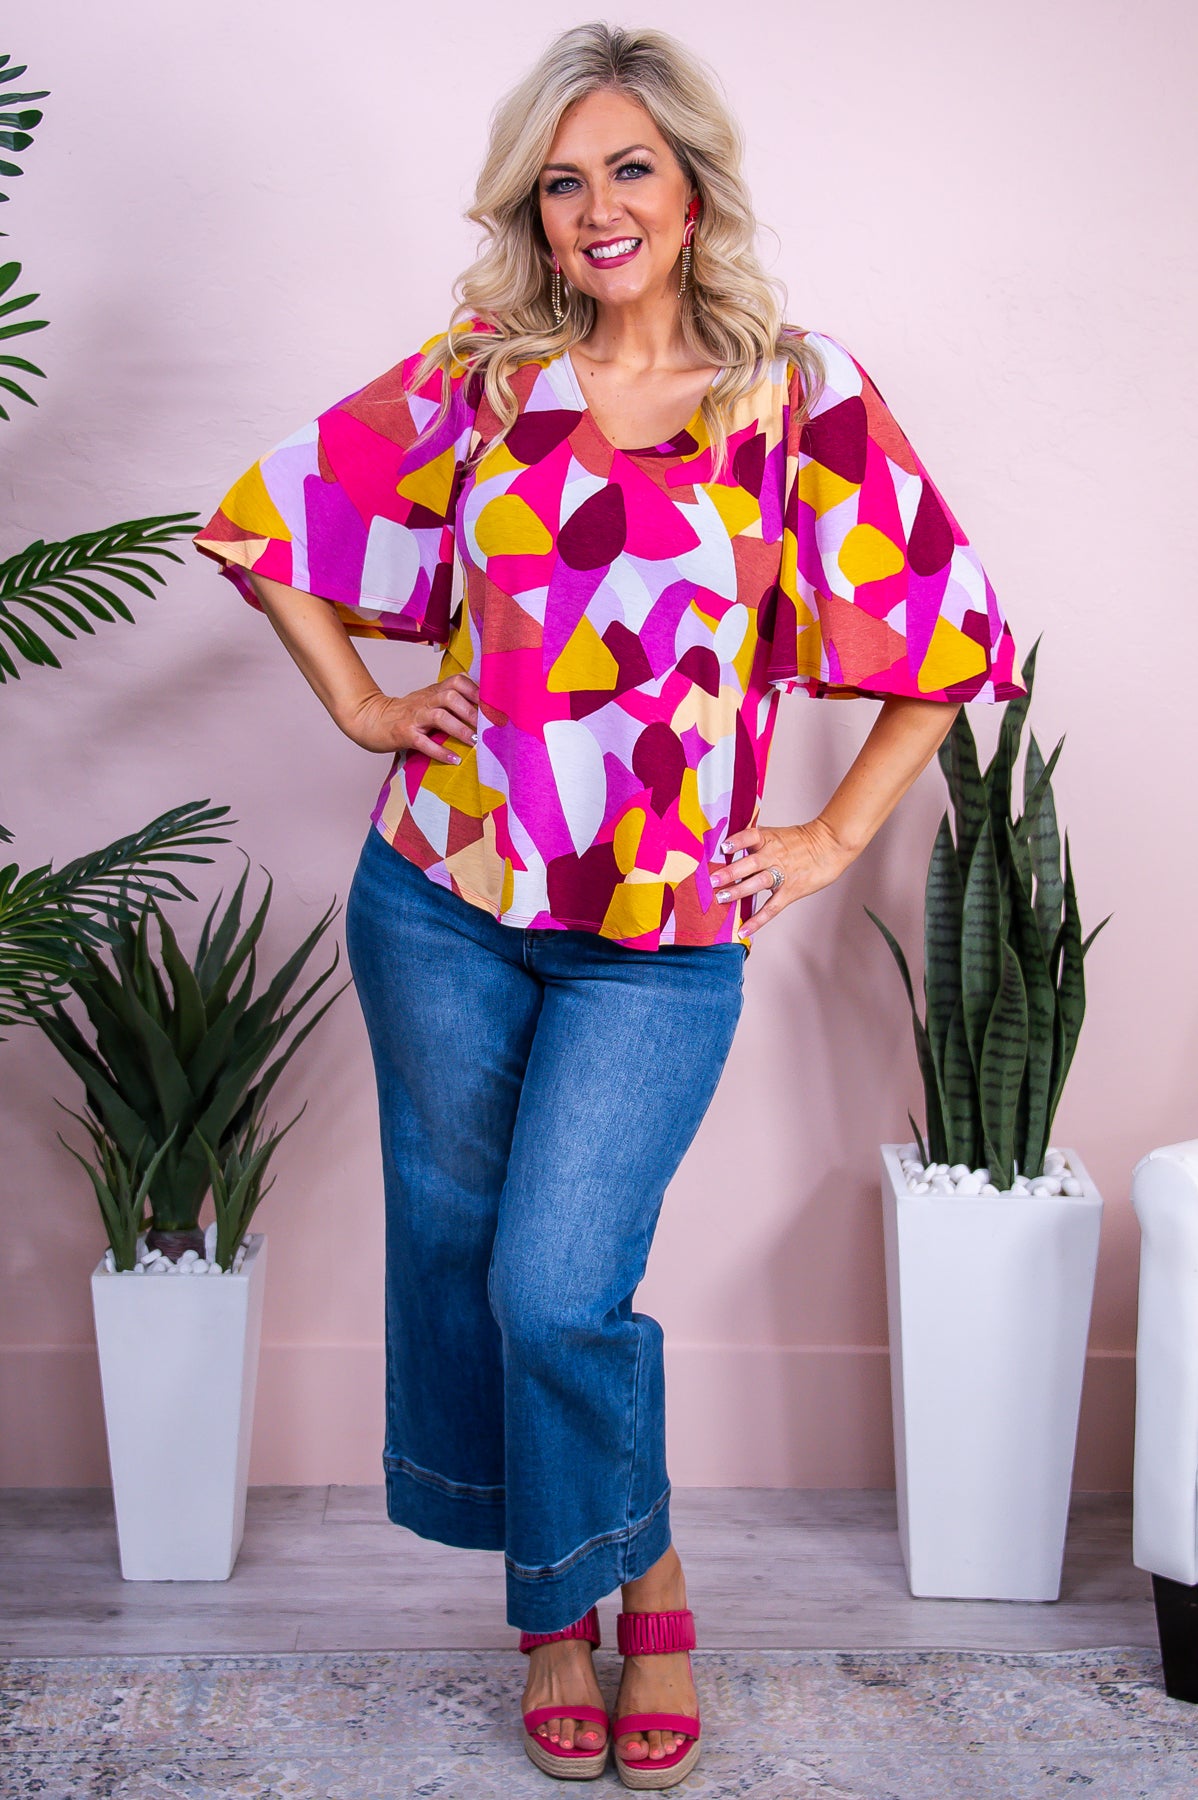 Lost Your Chance Hot Pink/Multi Color Geometrical Top - T10075HPK